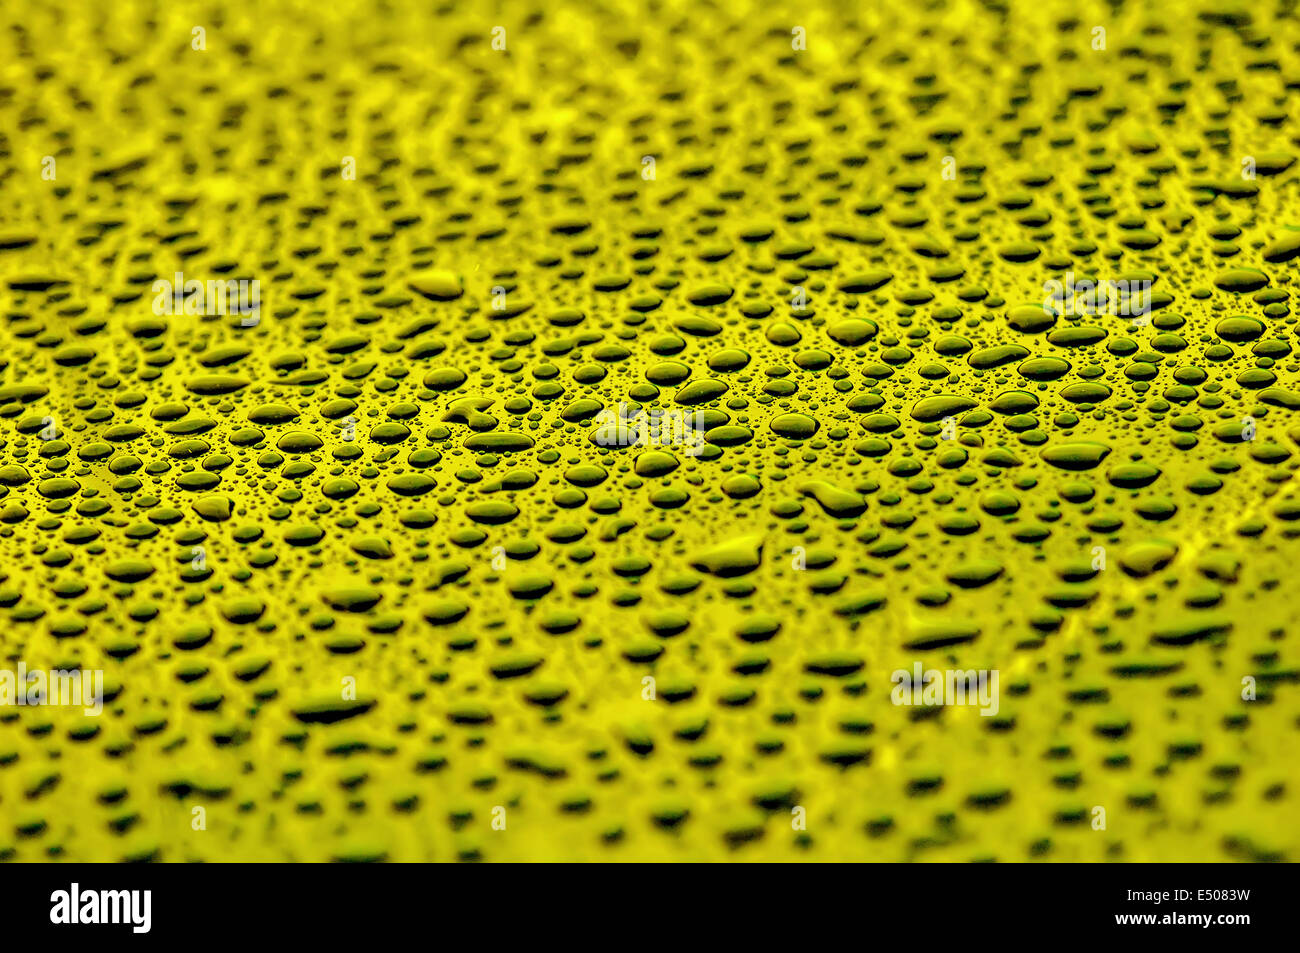 yellow water drops on water-repellent surface Stock Photo